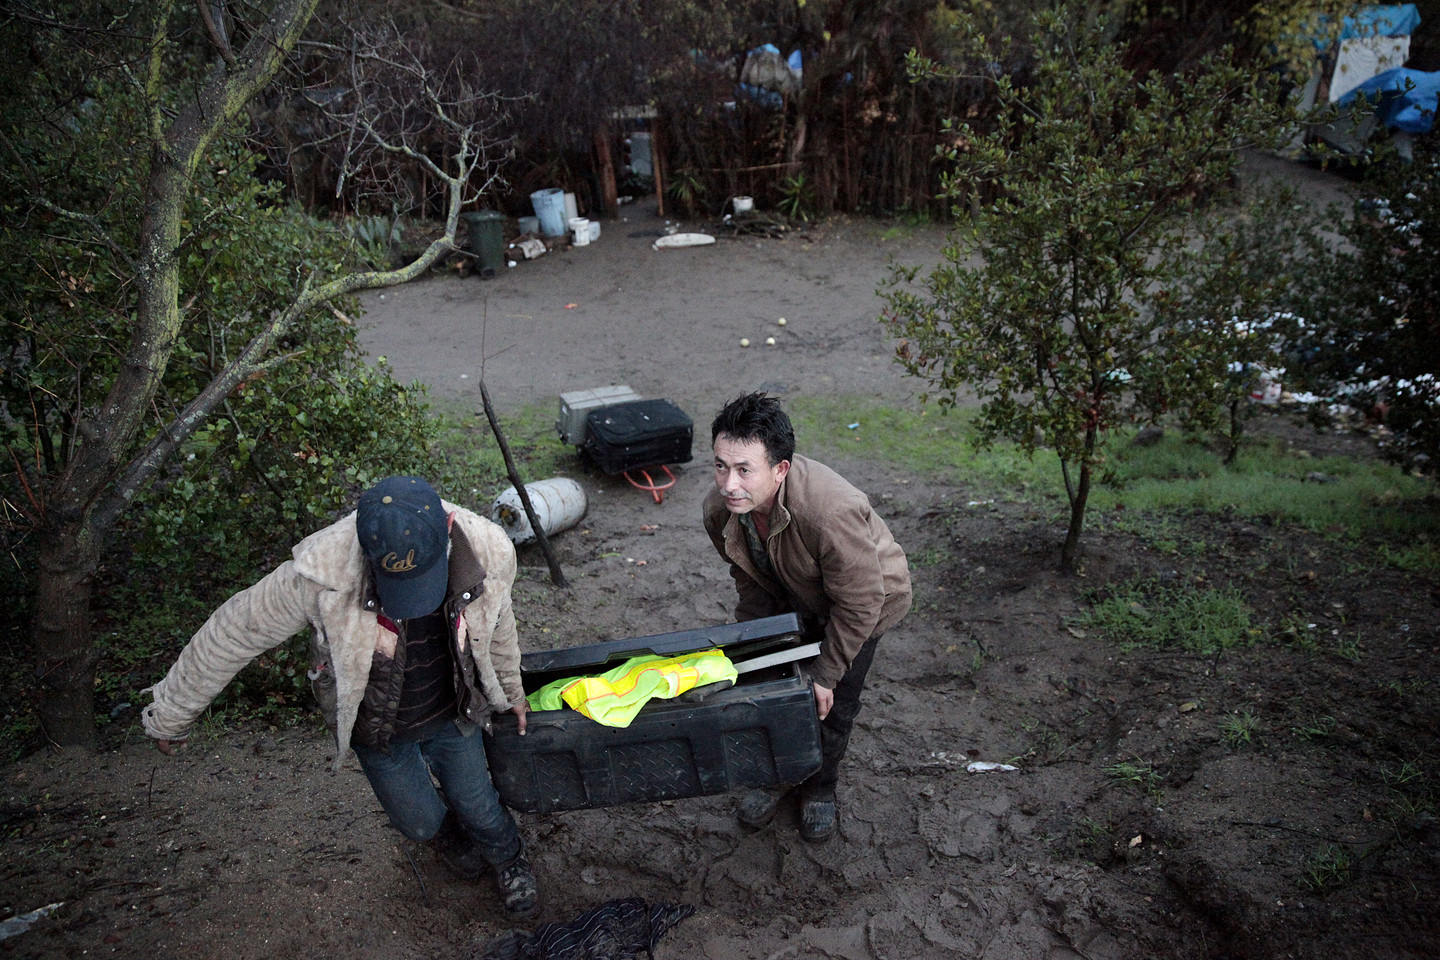 Jose Alcala, right, removes his belongings after living at The Jungle for two years. Rain and mud has complicated the move for many residents. (James Tensuan/KQED) 